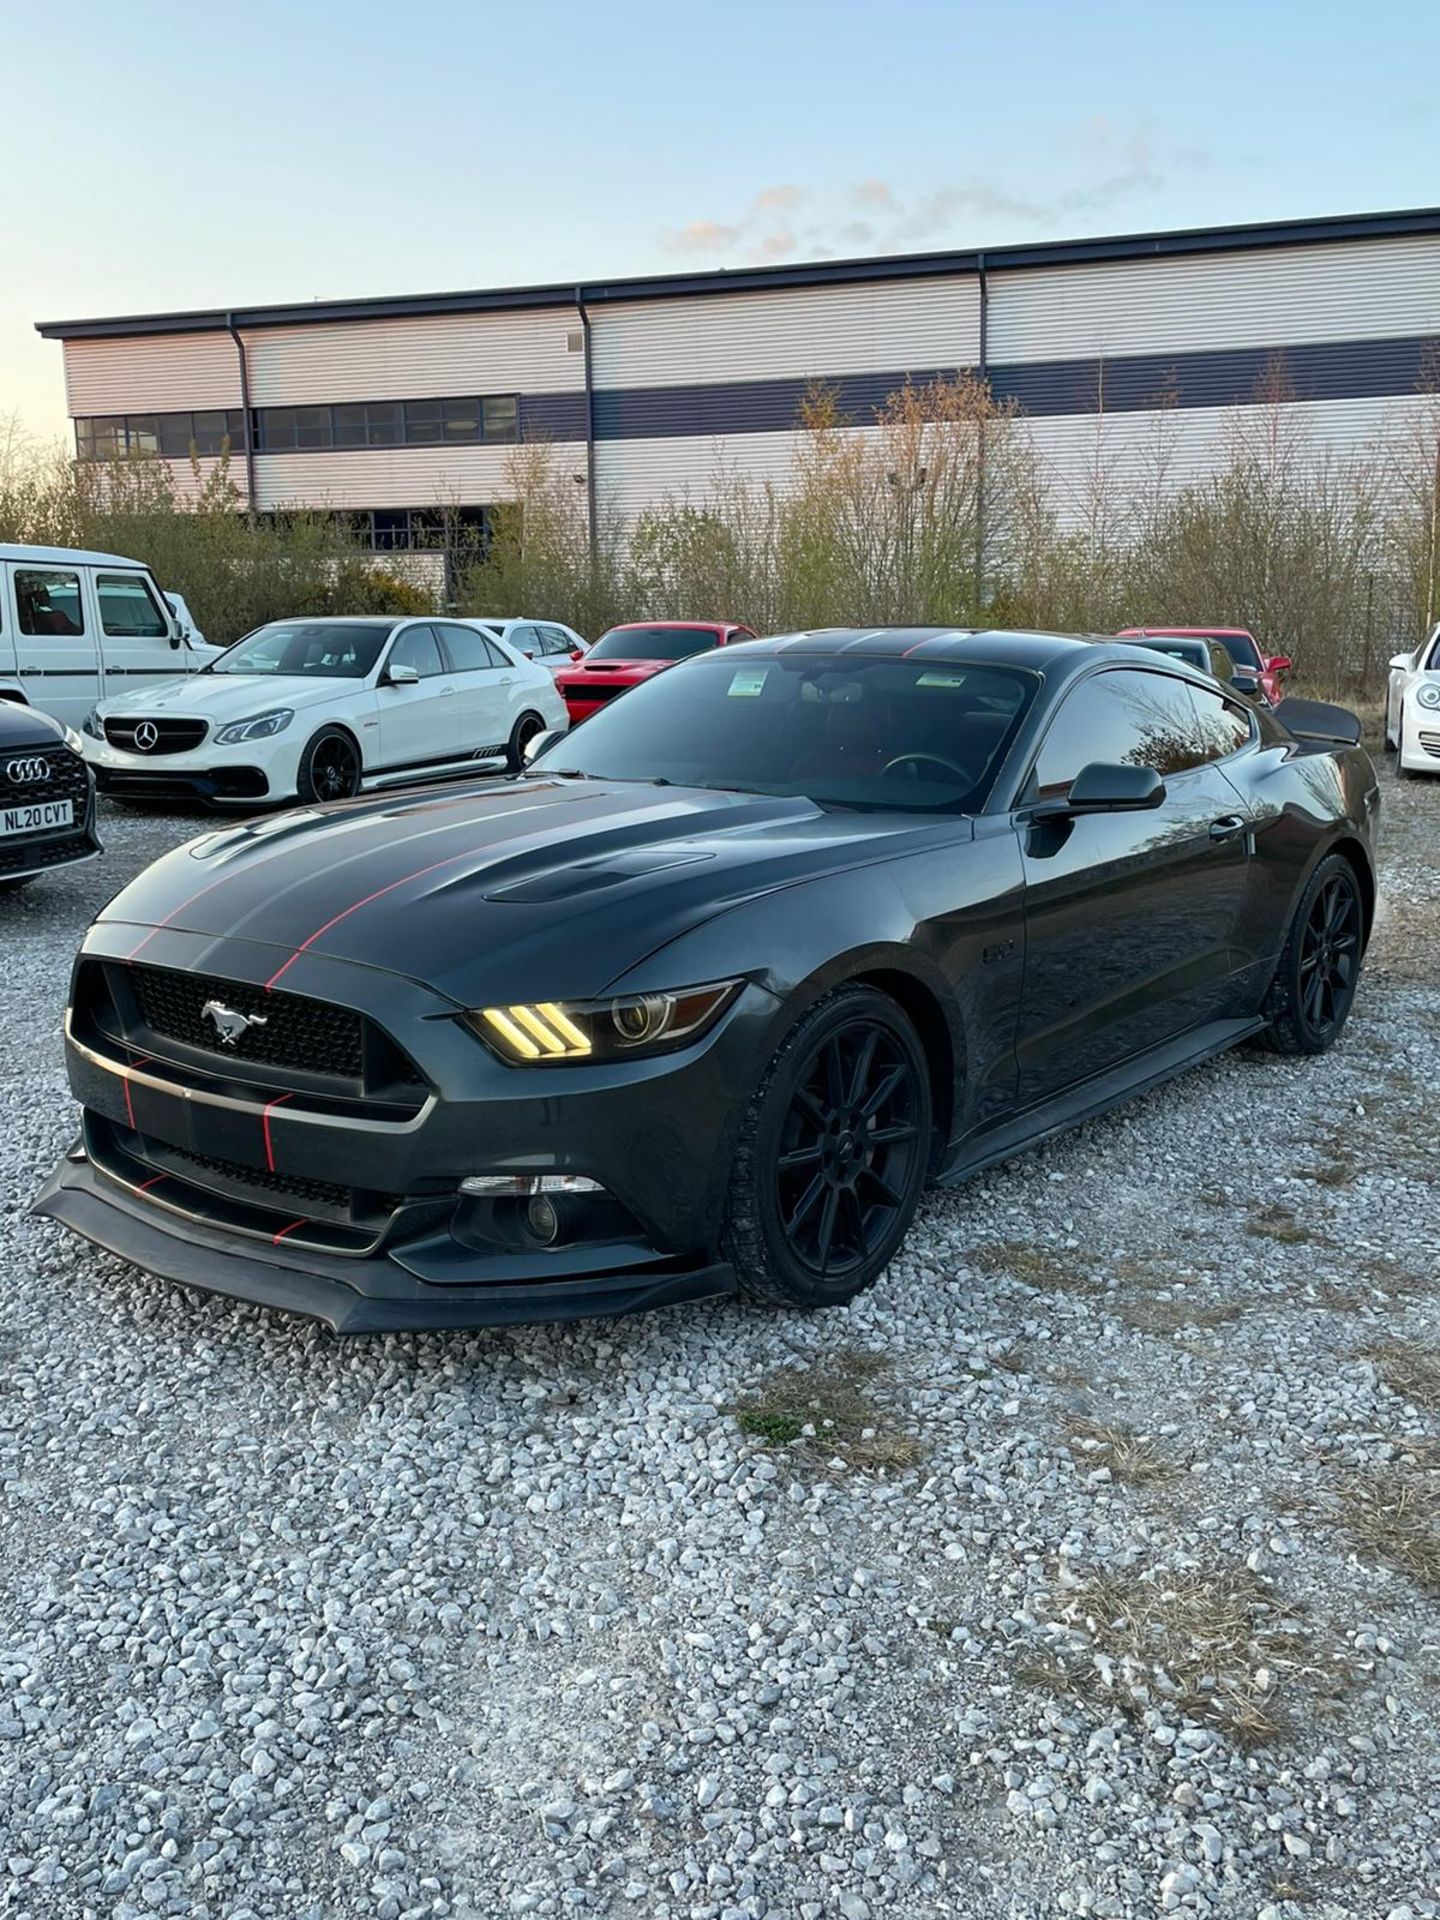 2016 5.0 V8 Manual mustang GT - Low Mileage - Image 2 of 11